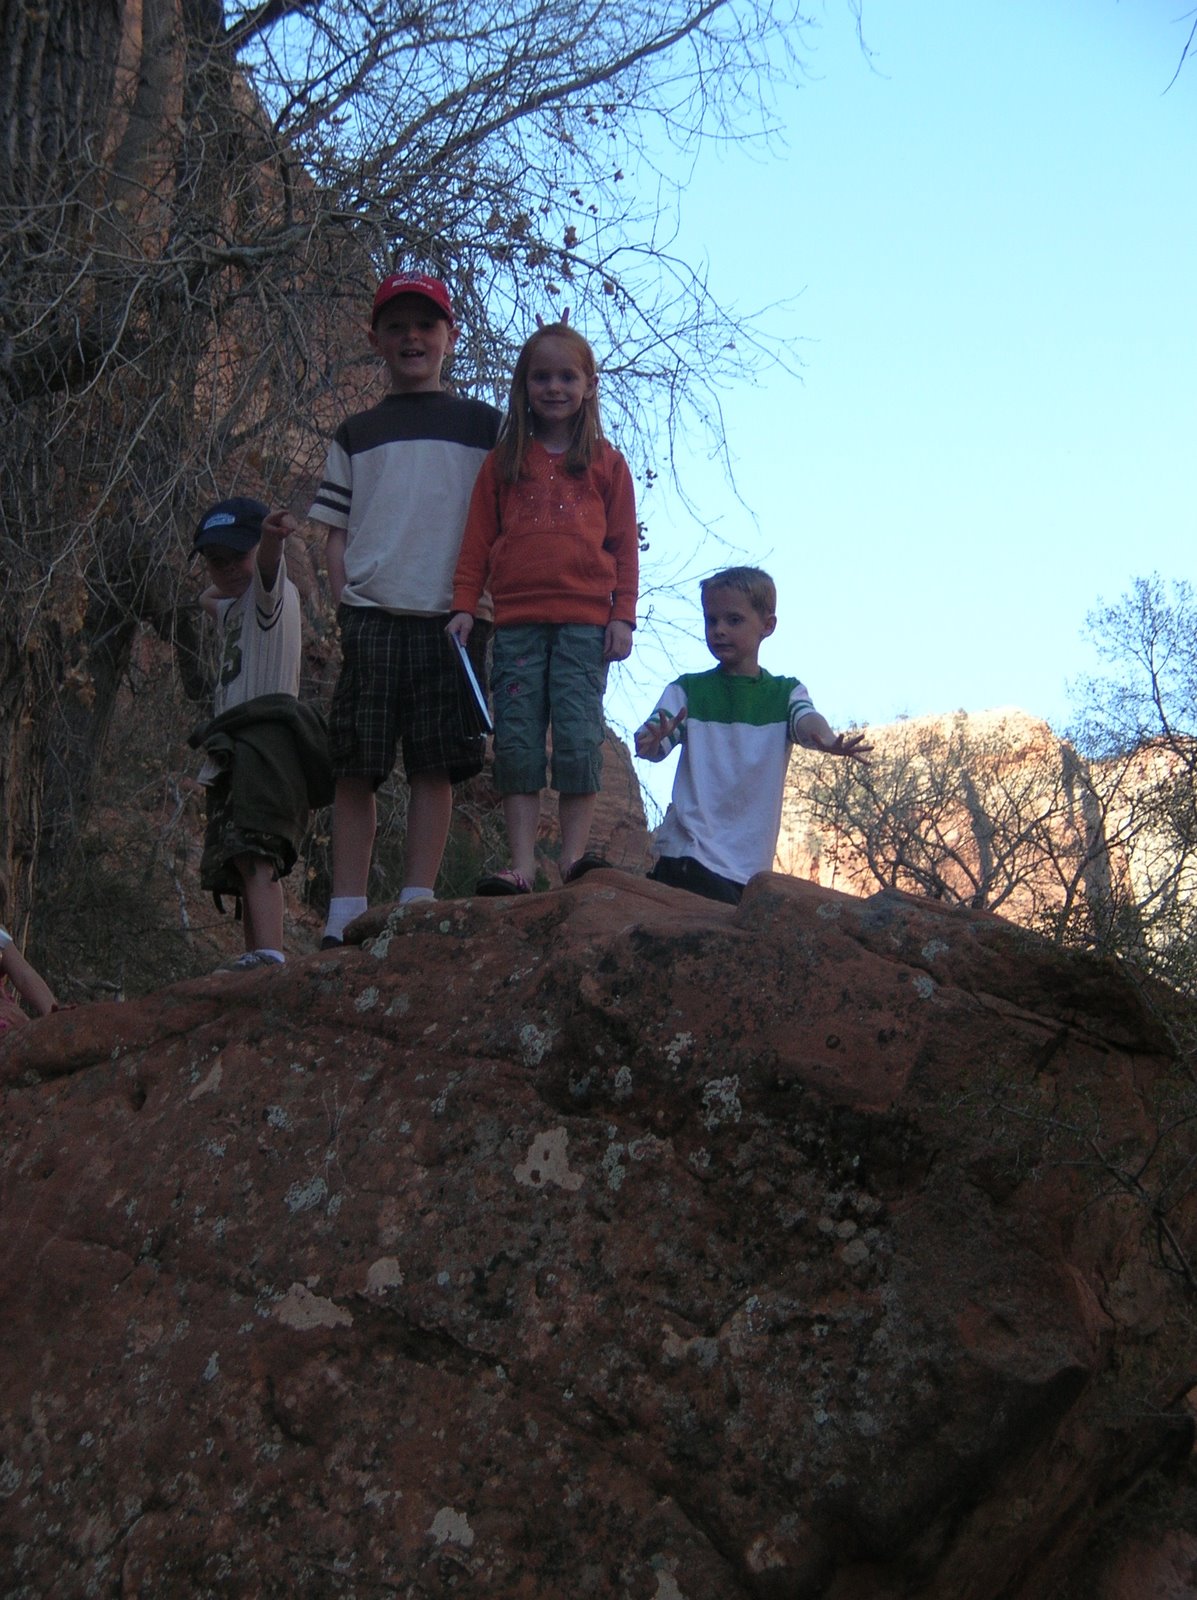 [Carter,+Ethan,+Mckenzie,+and+Chase+Zion's+Park+2008.JPG]